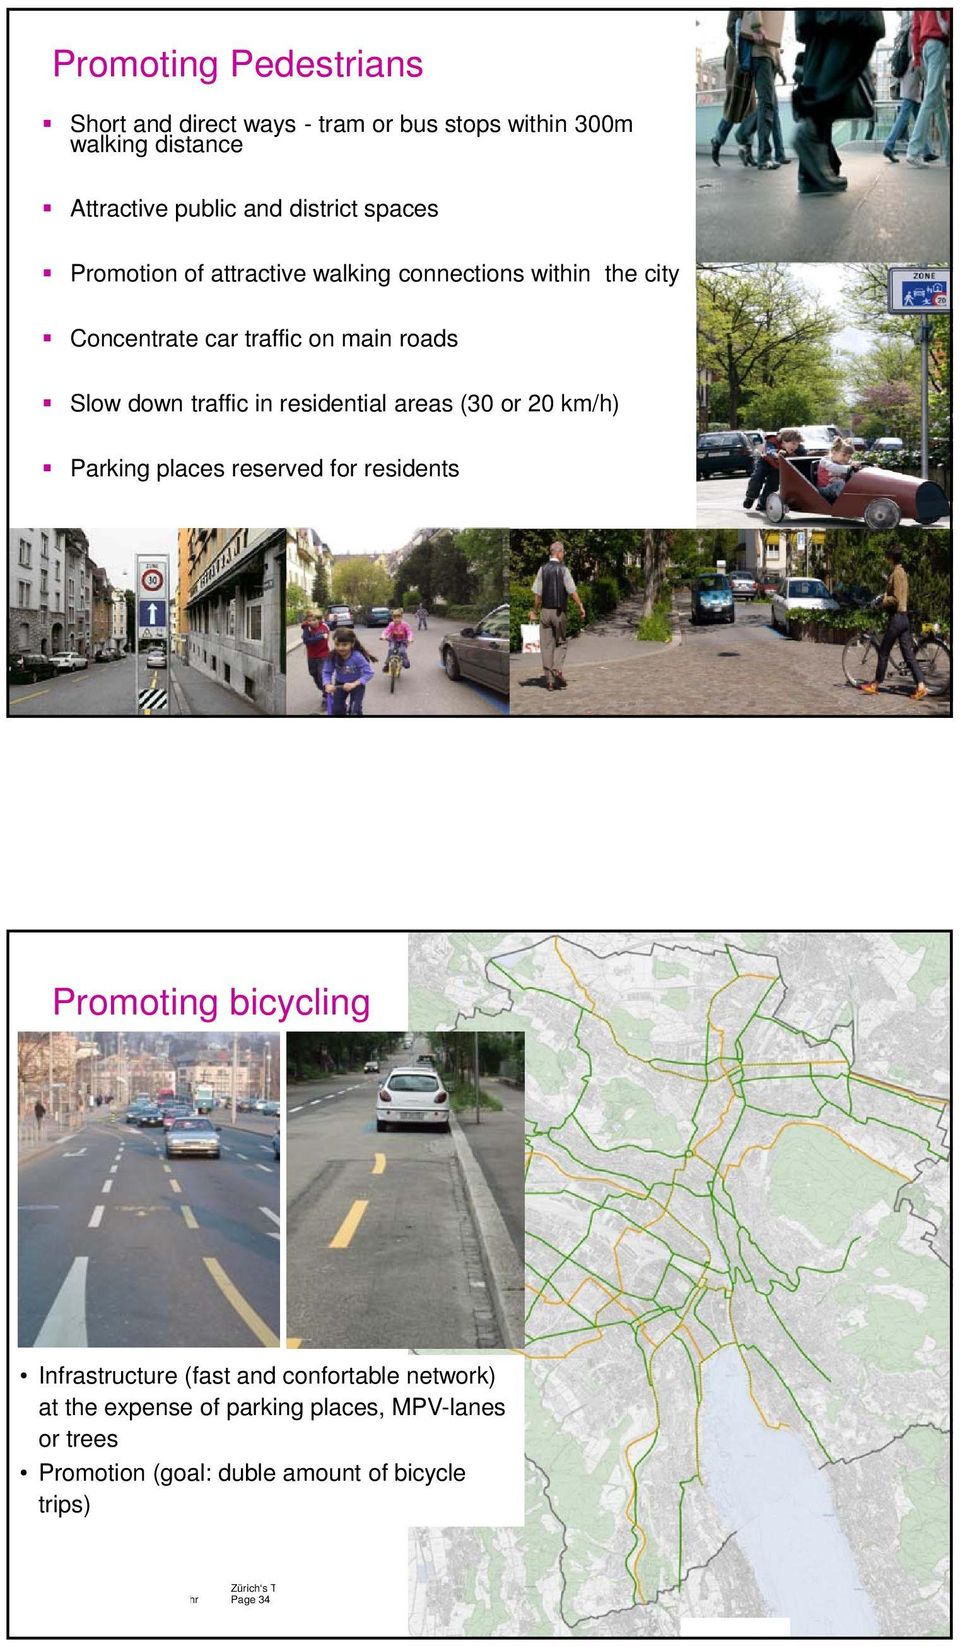 residential areas (30 or 20 km/h) Parking places reserved for residents Page 33 Promoting bicycling Infrastructure (fast and